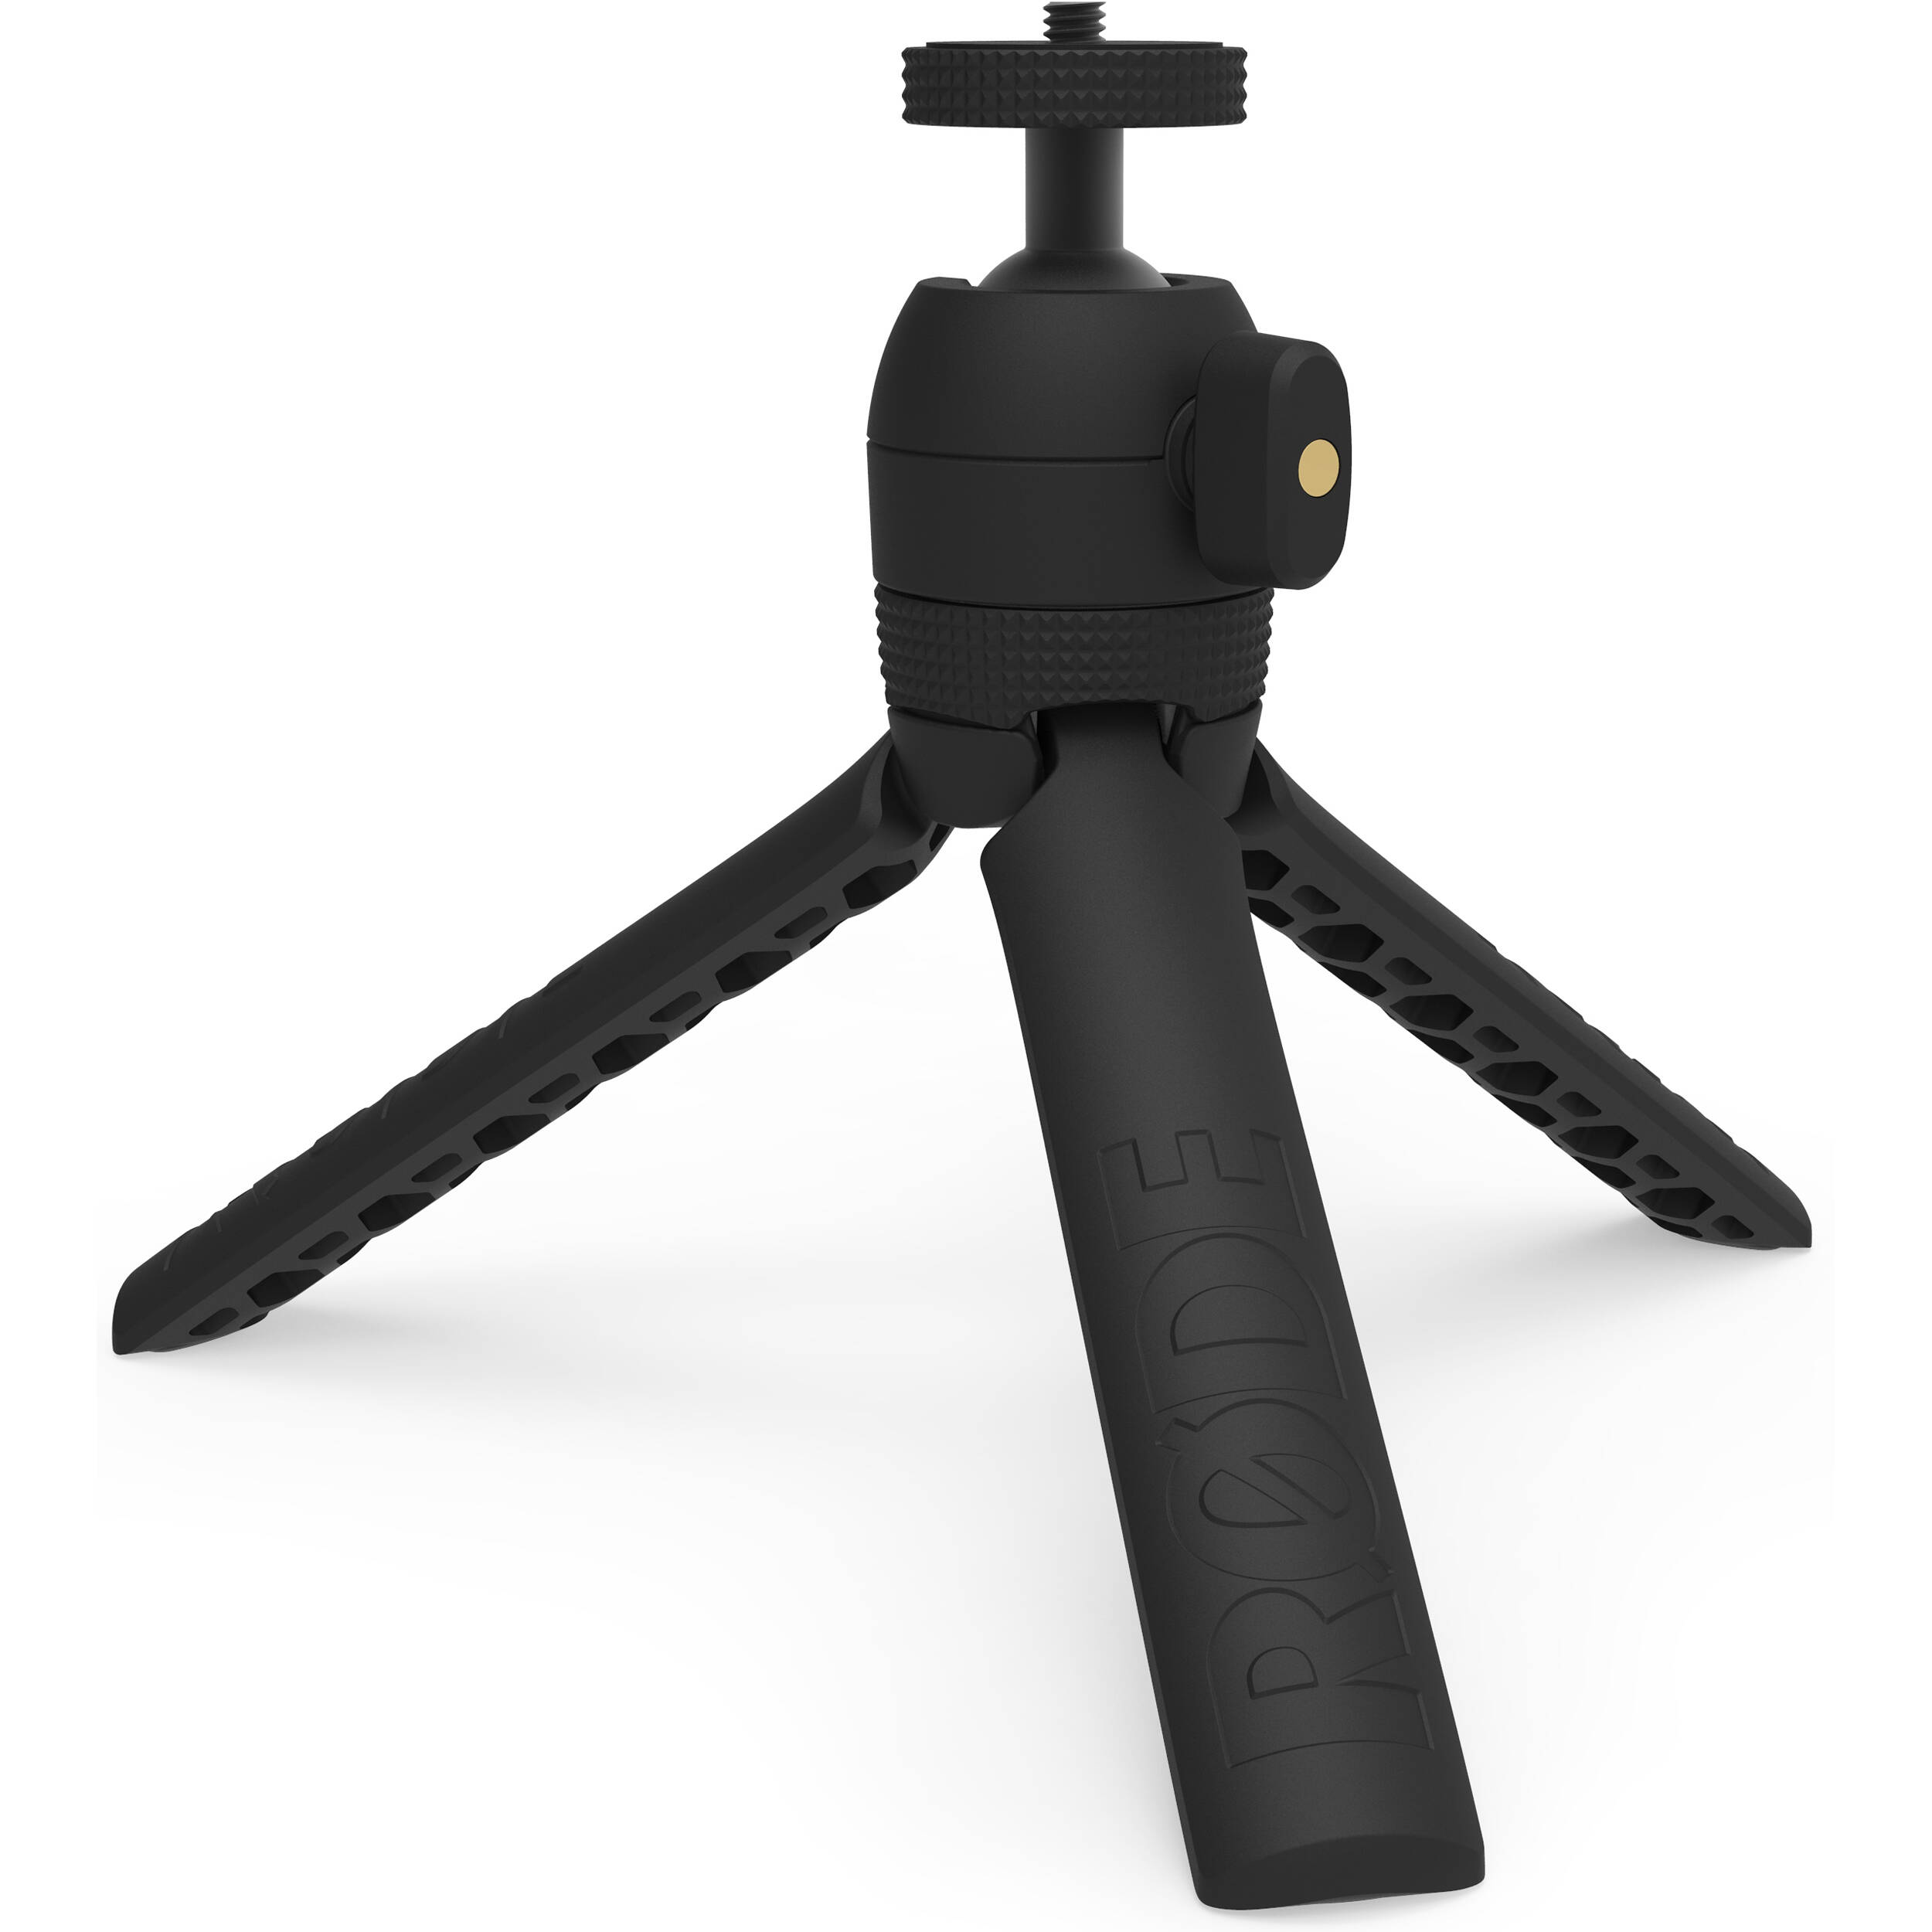 Rode Vlogger Kit, Includes VideoMicro,Tripod 2 , Smart Grip, MicroLED Light and Accessories - Universal